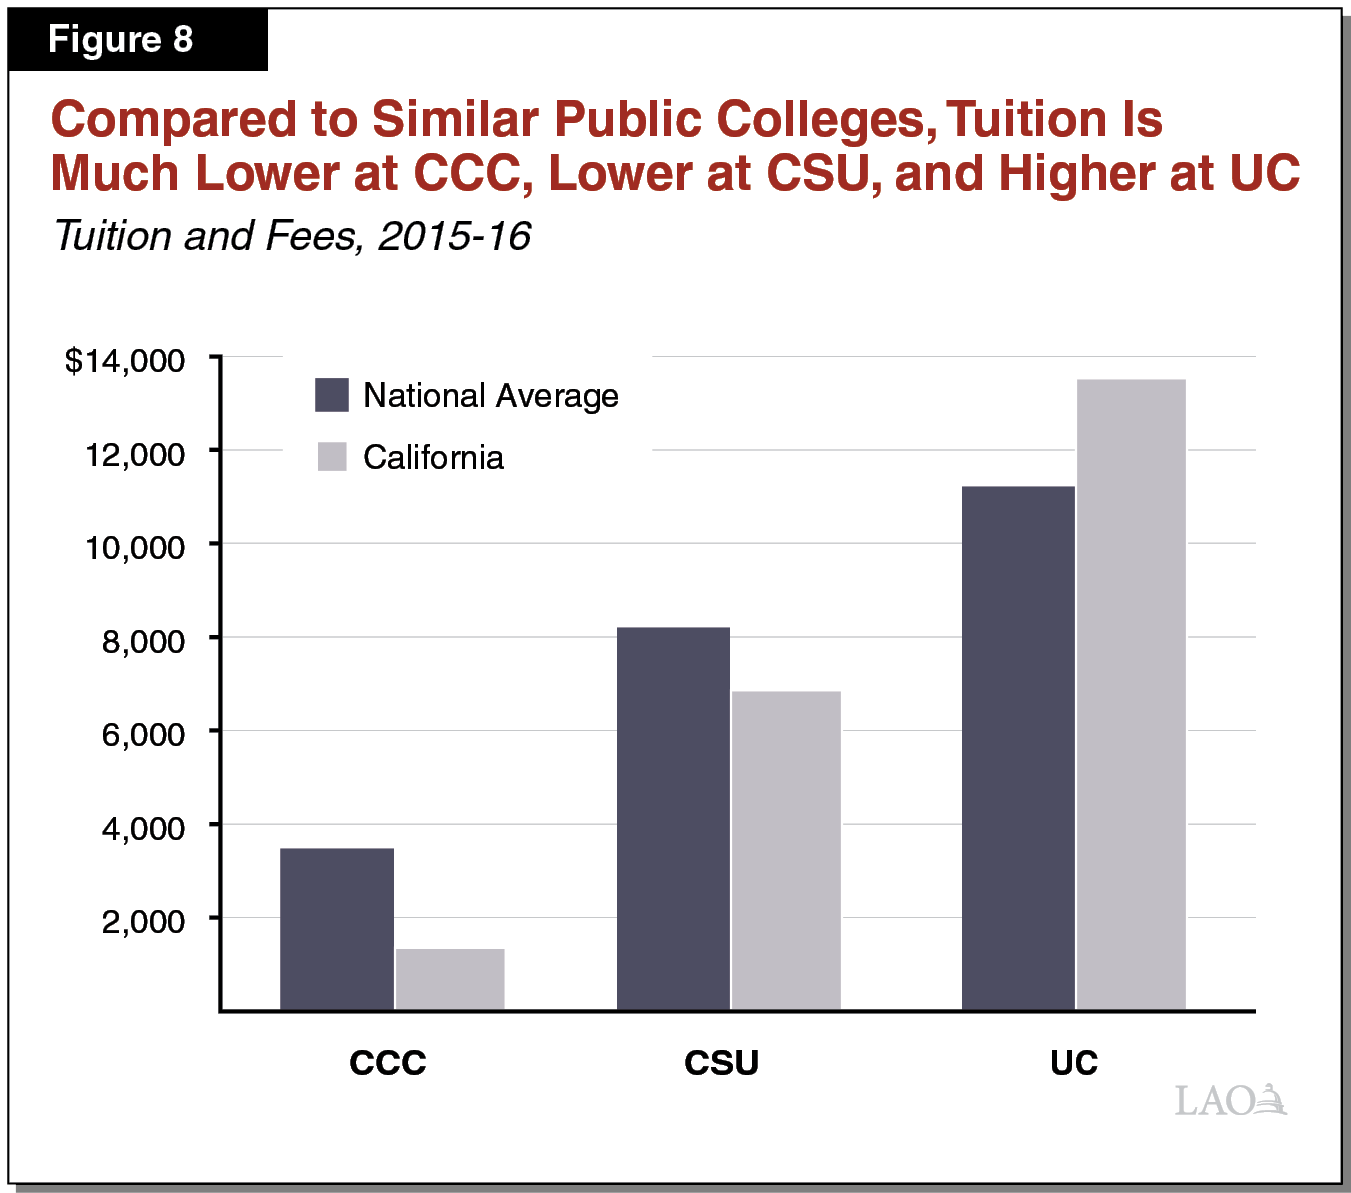 Figure 8 - Compared to Similar Public Colleges, Tuition Is